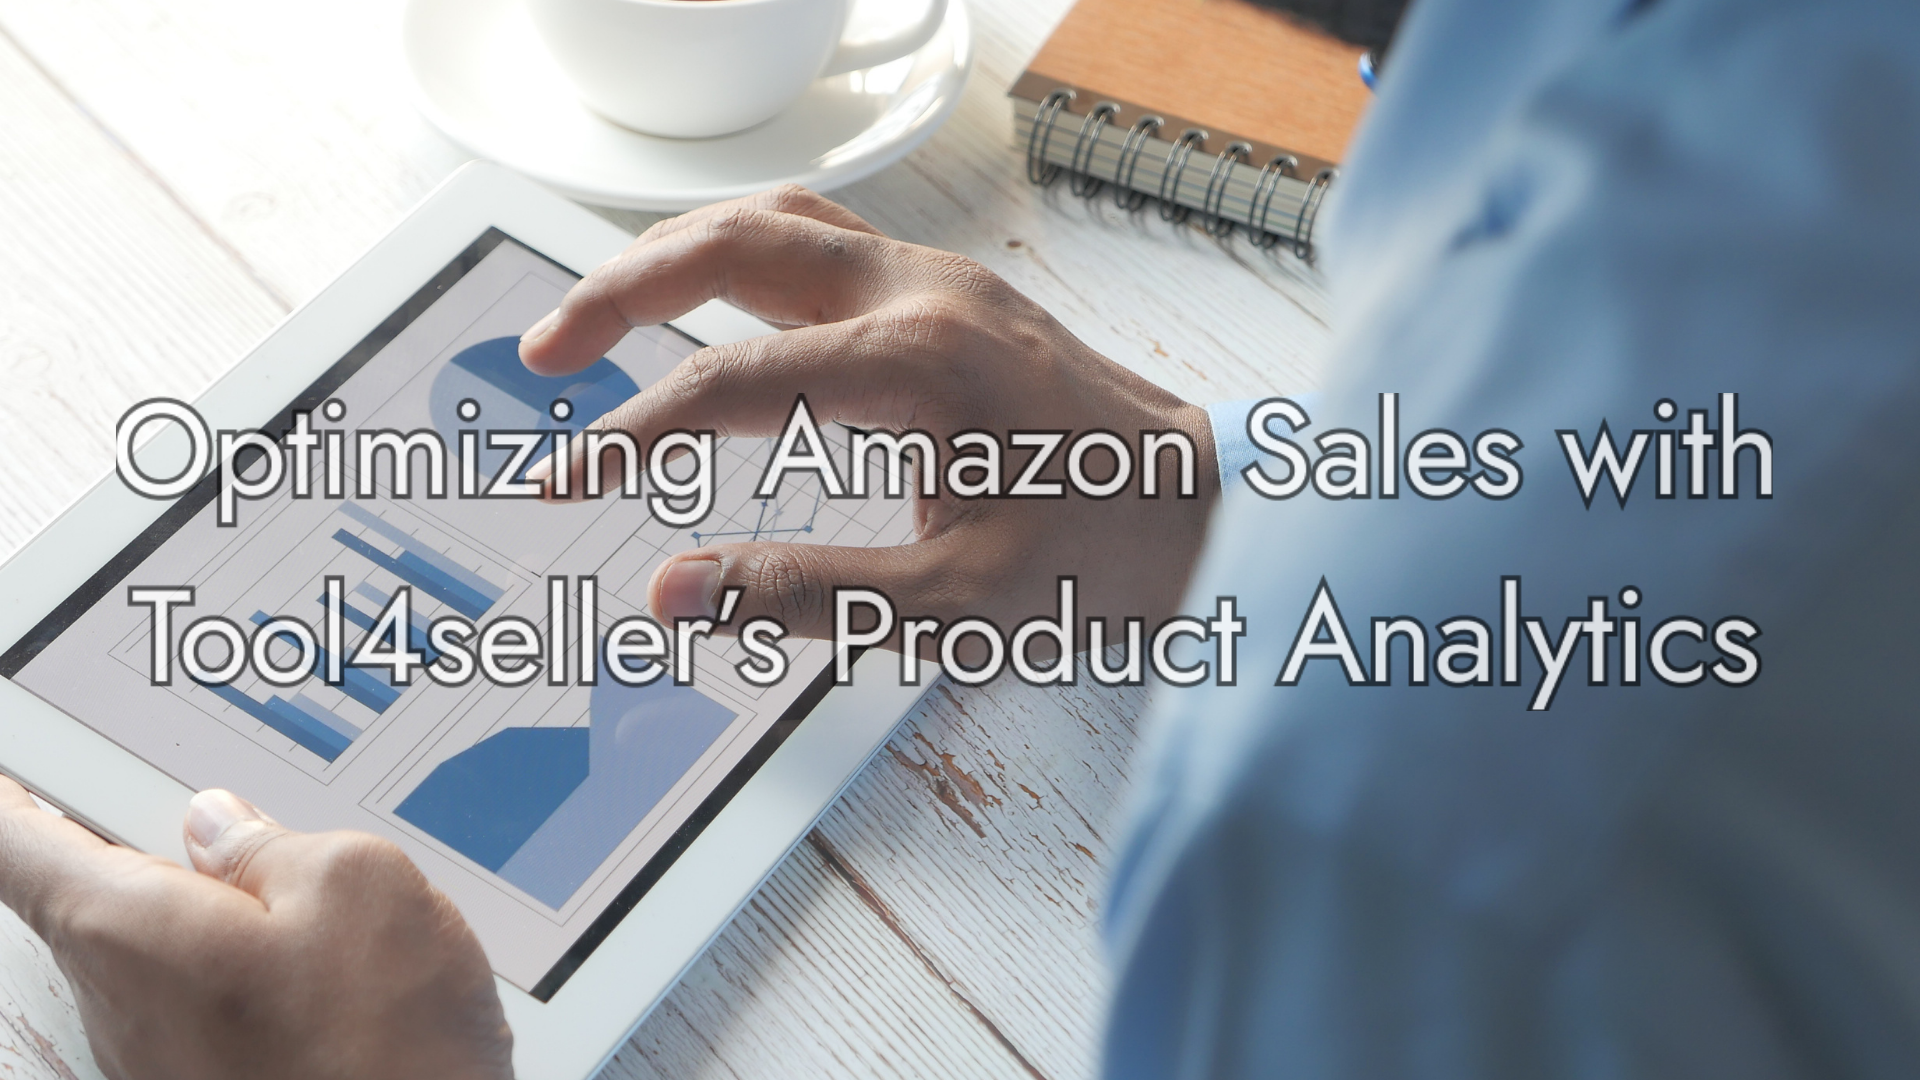 Optimizing Amazon Sales with Tool4seller’s Product Analytics